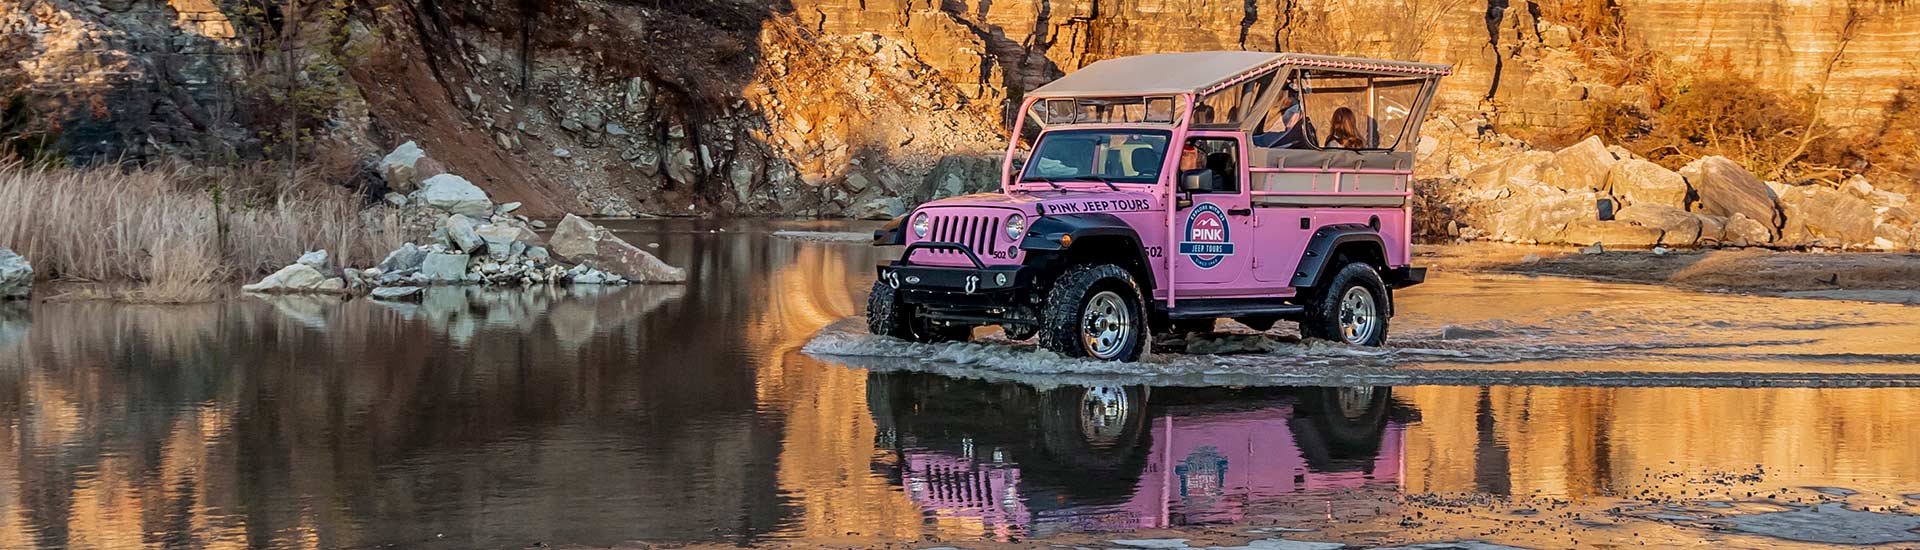 Pink Jeep Tours’ Jeep Wrangler glides through still water in front of a golden-lit rockface with its reflection below.